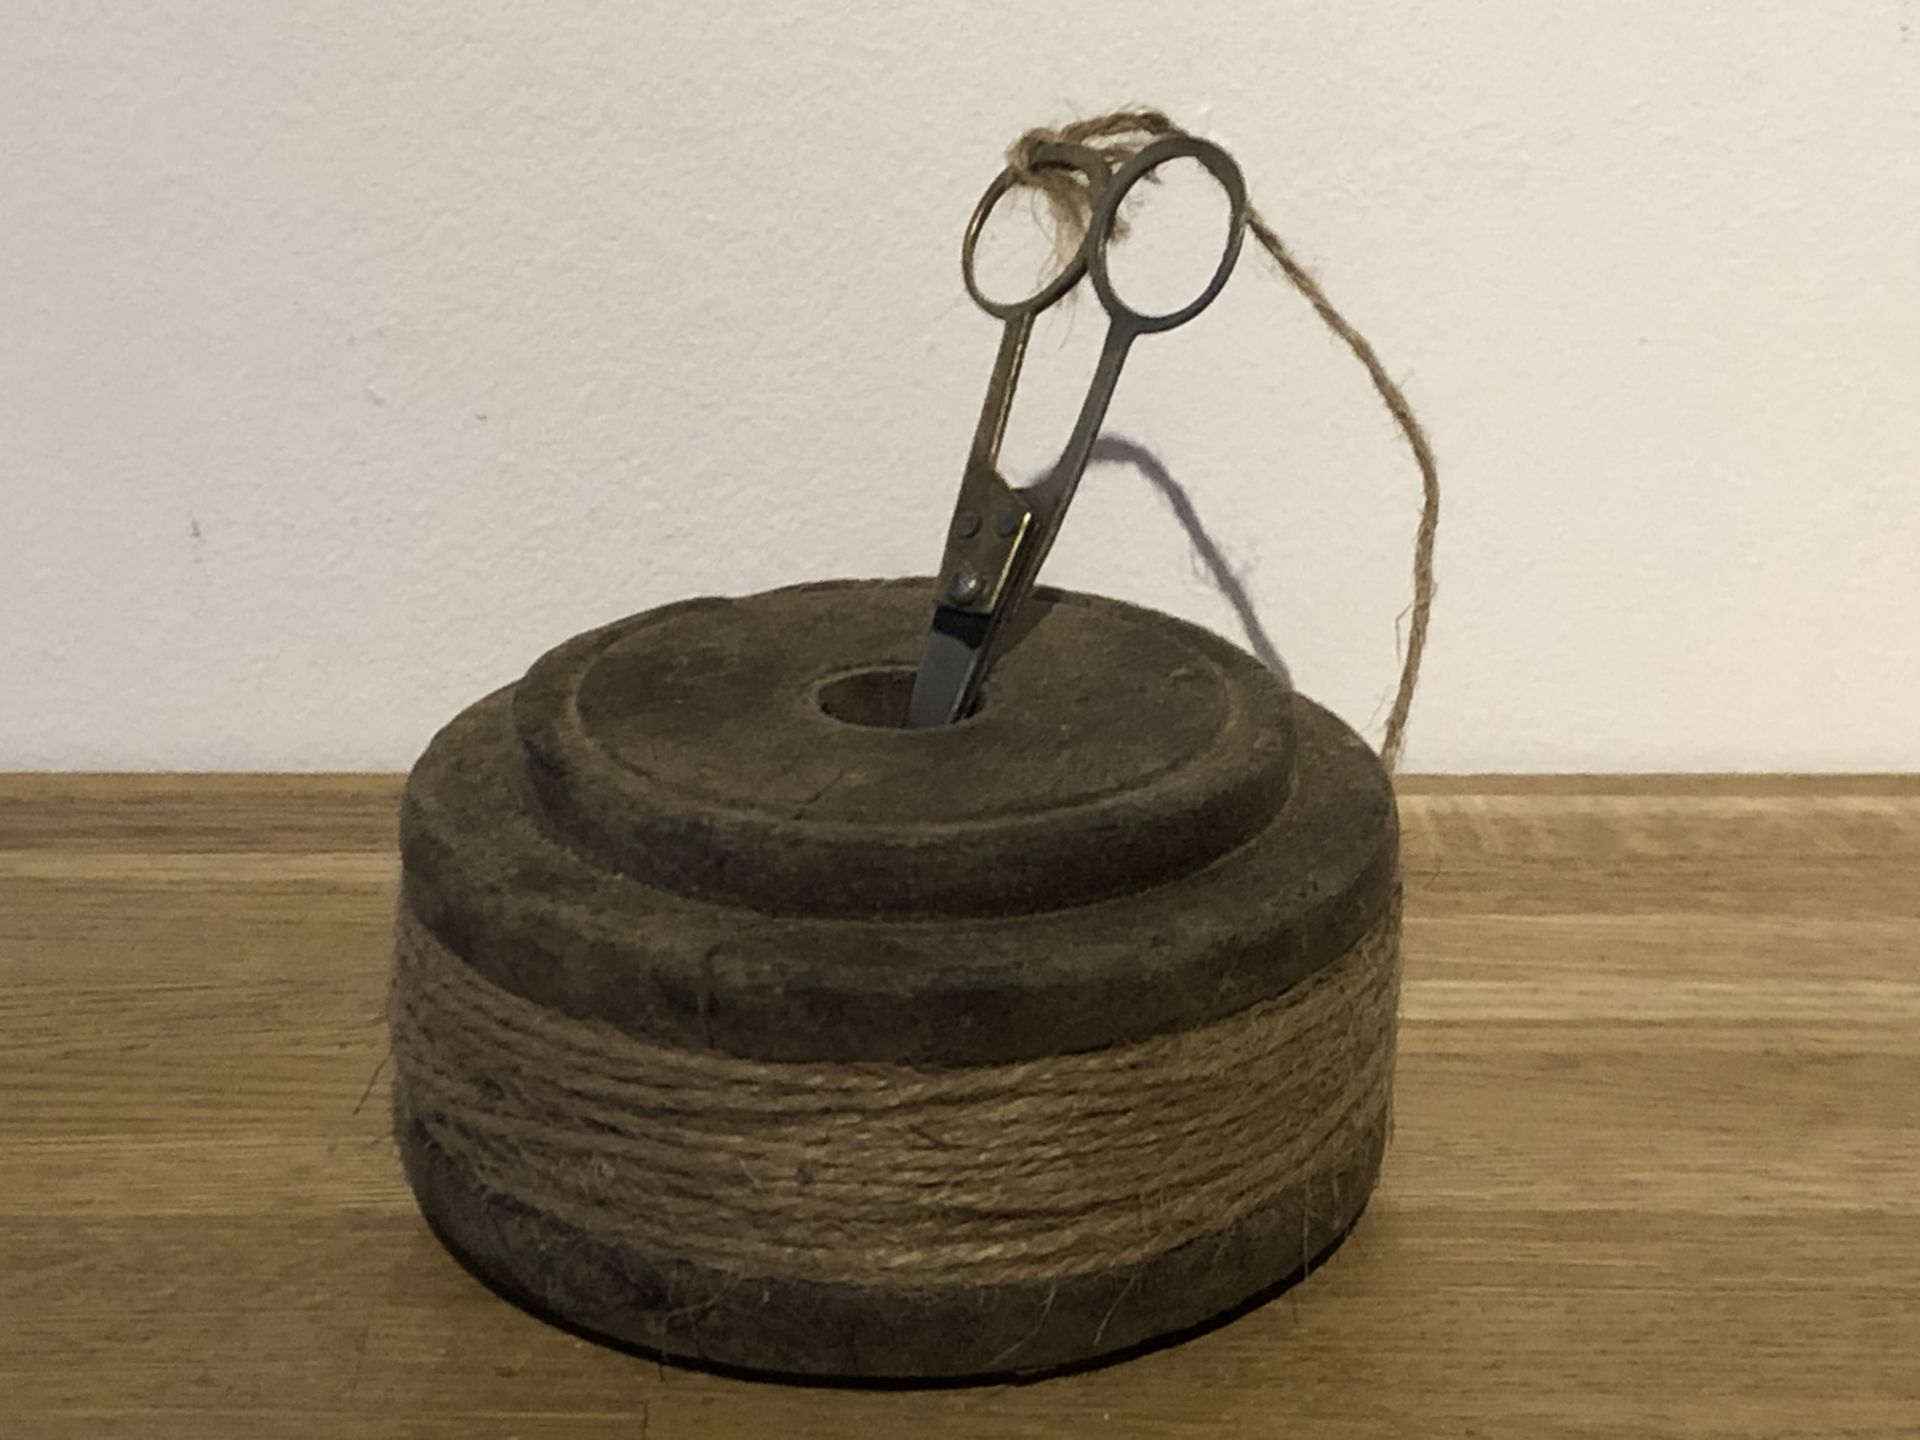 Wooden Spool With Jute String & Scissors - Image 3 of 3